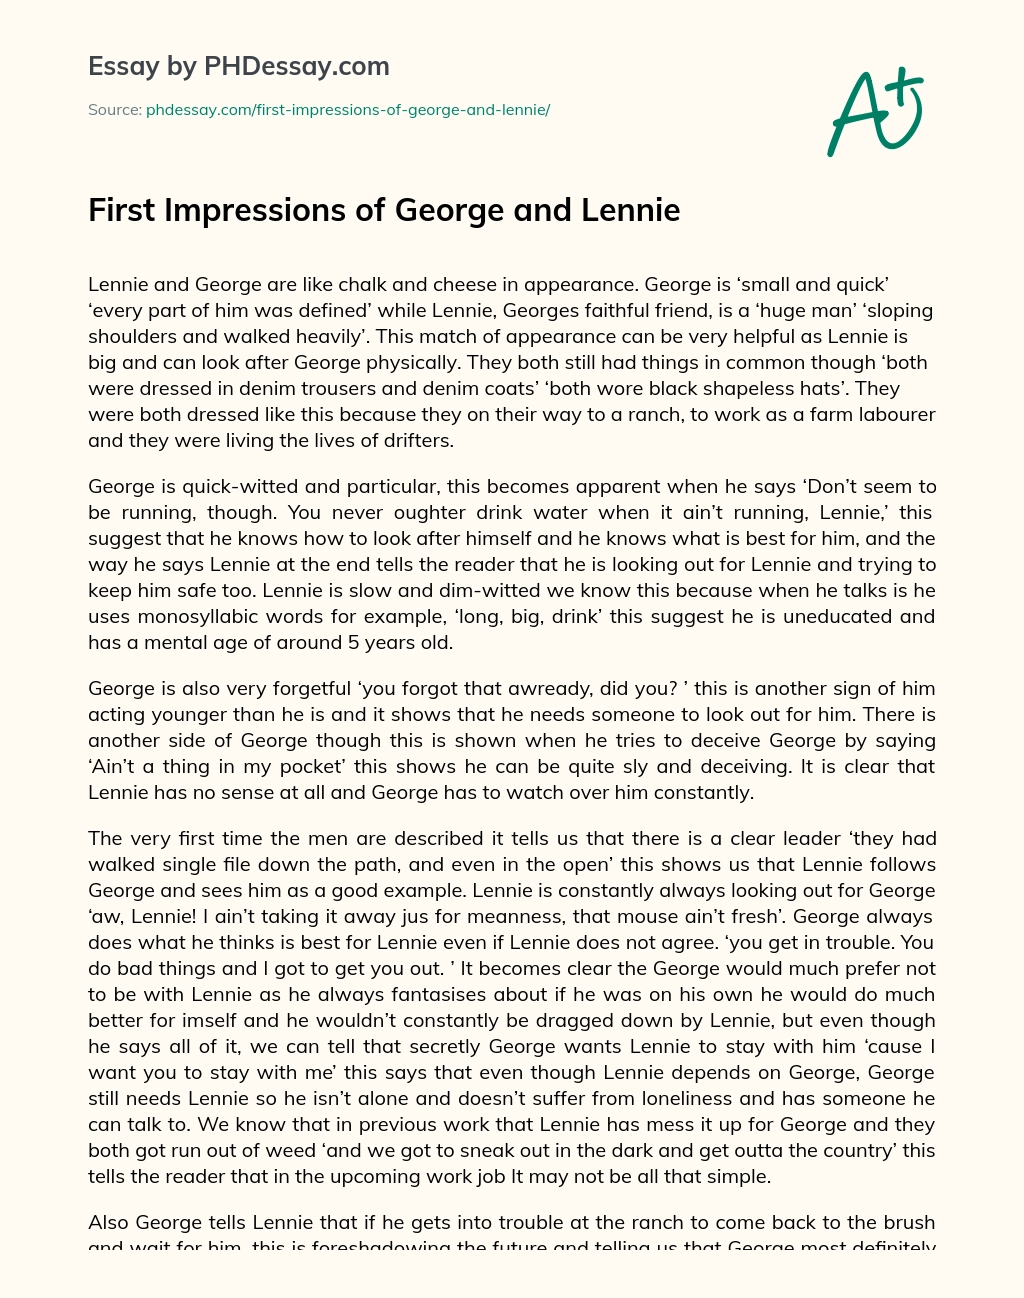 First Impressions of George and Lennie essay